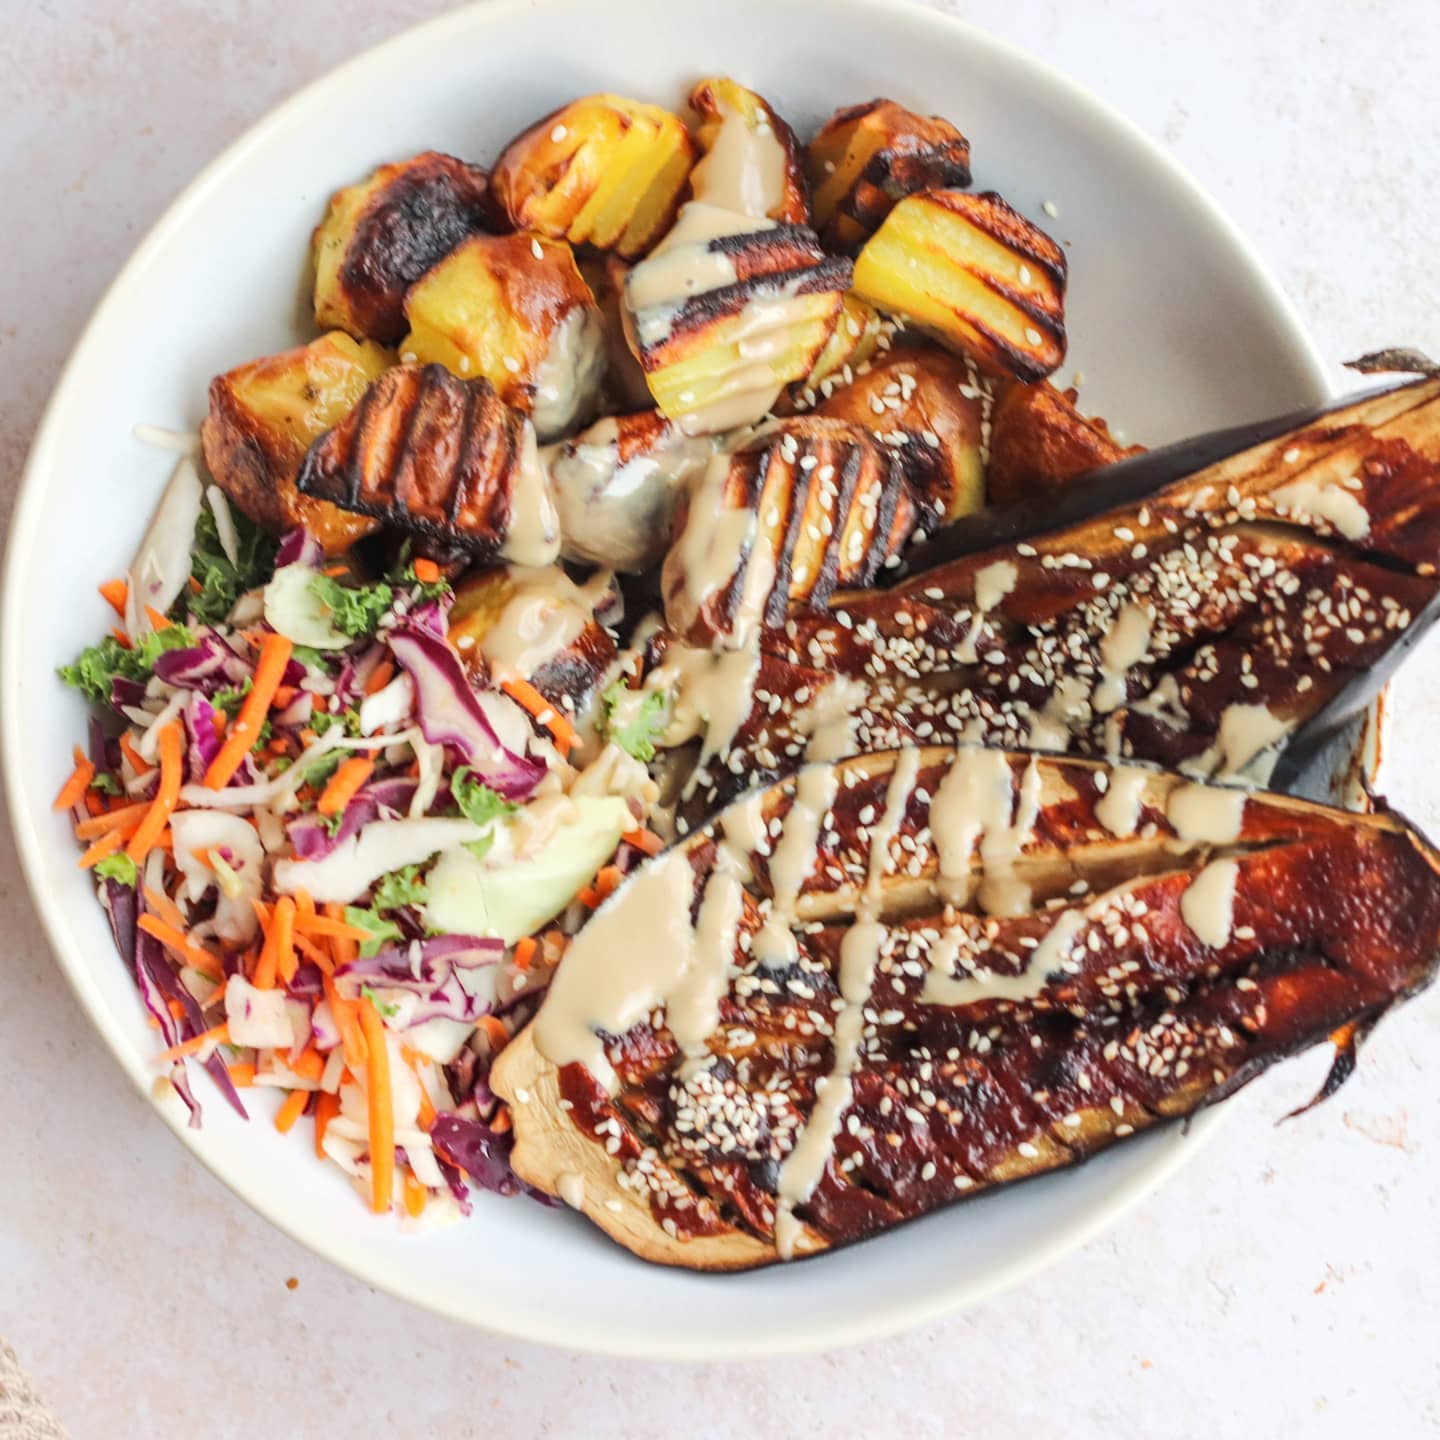 Miso Marinated Eggplant with Air-Fried Roasted Veggies